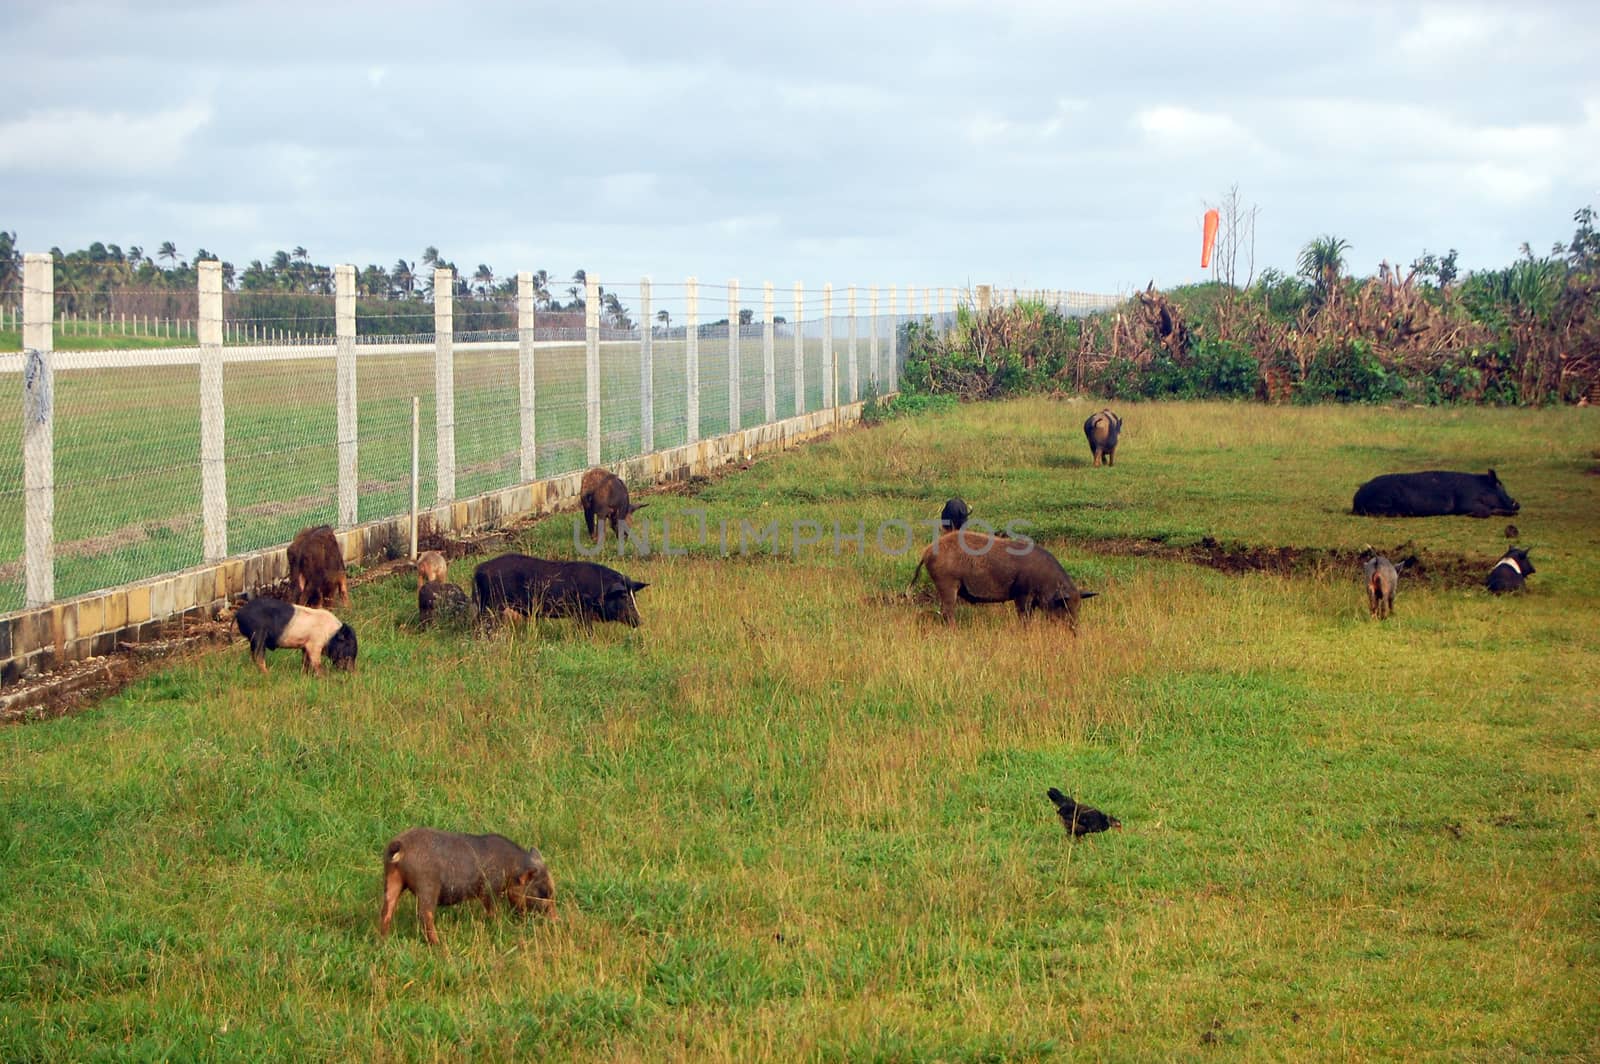 Pigs at field near airport fence, Haapai Island, Polynesia, South Pacific, Tonga